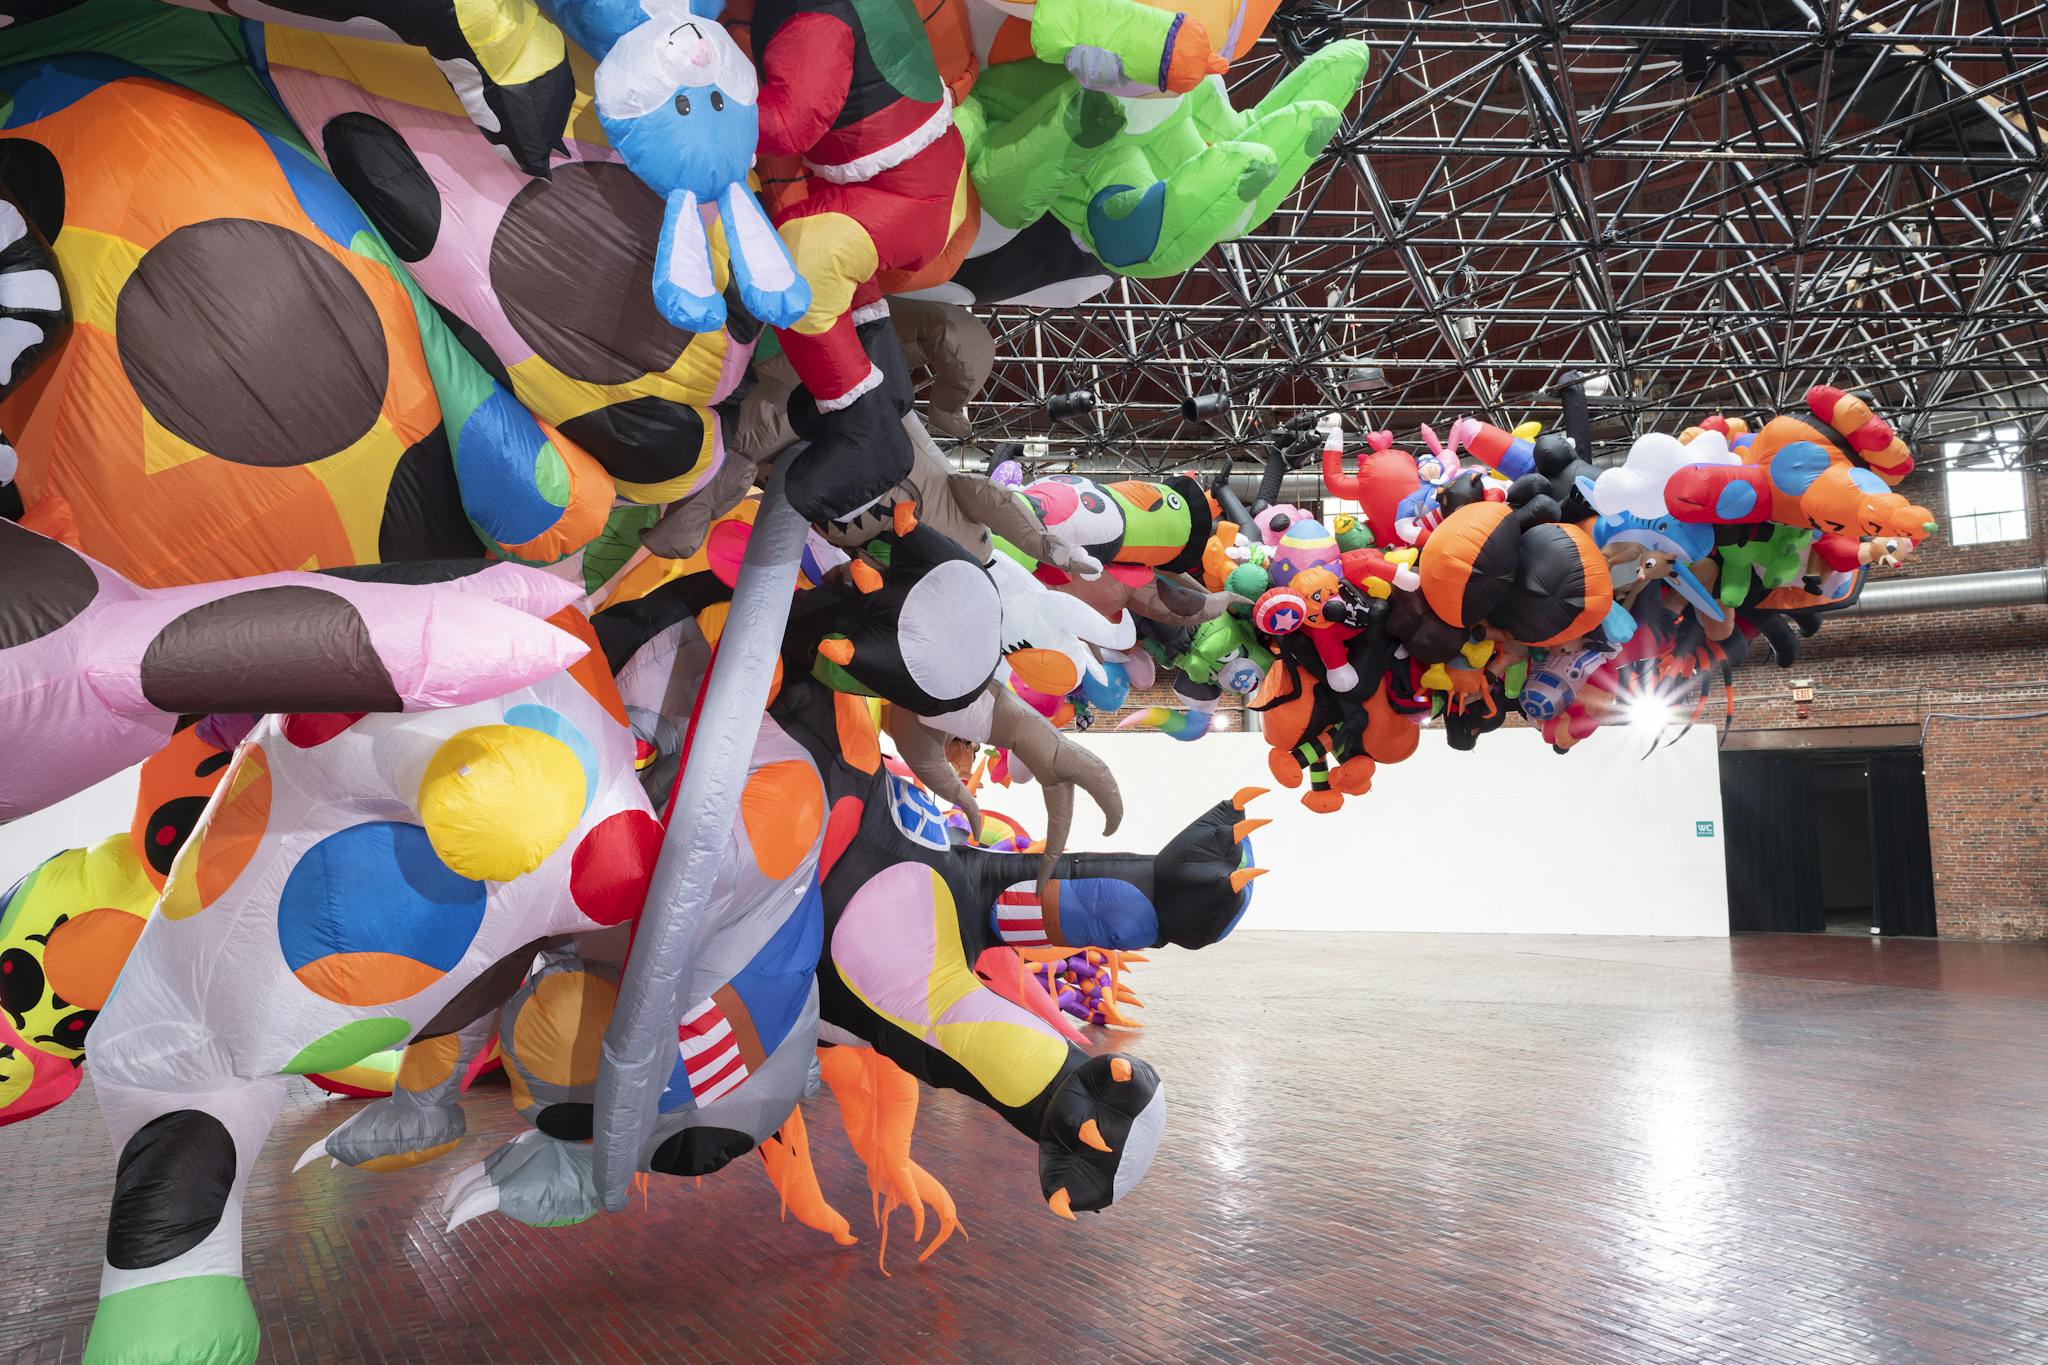 An abundance of colorful, inflatable figures hanging in the Cyclorama.